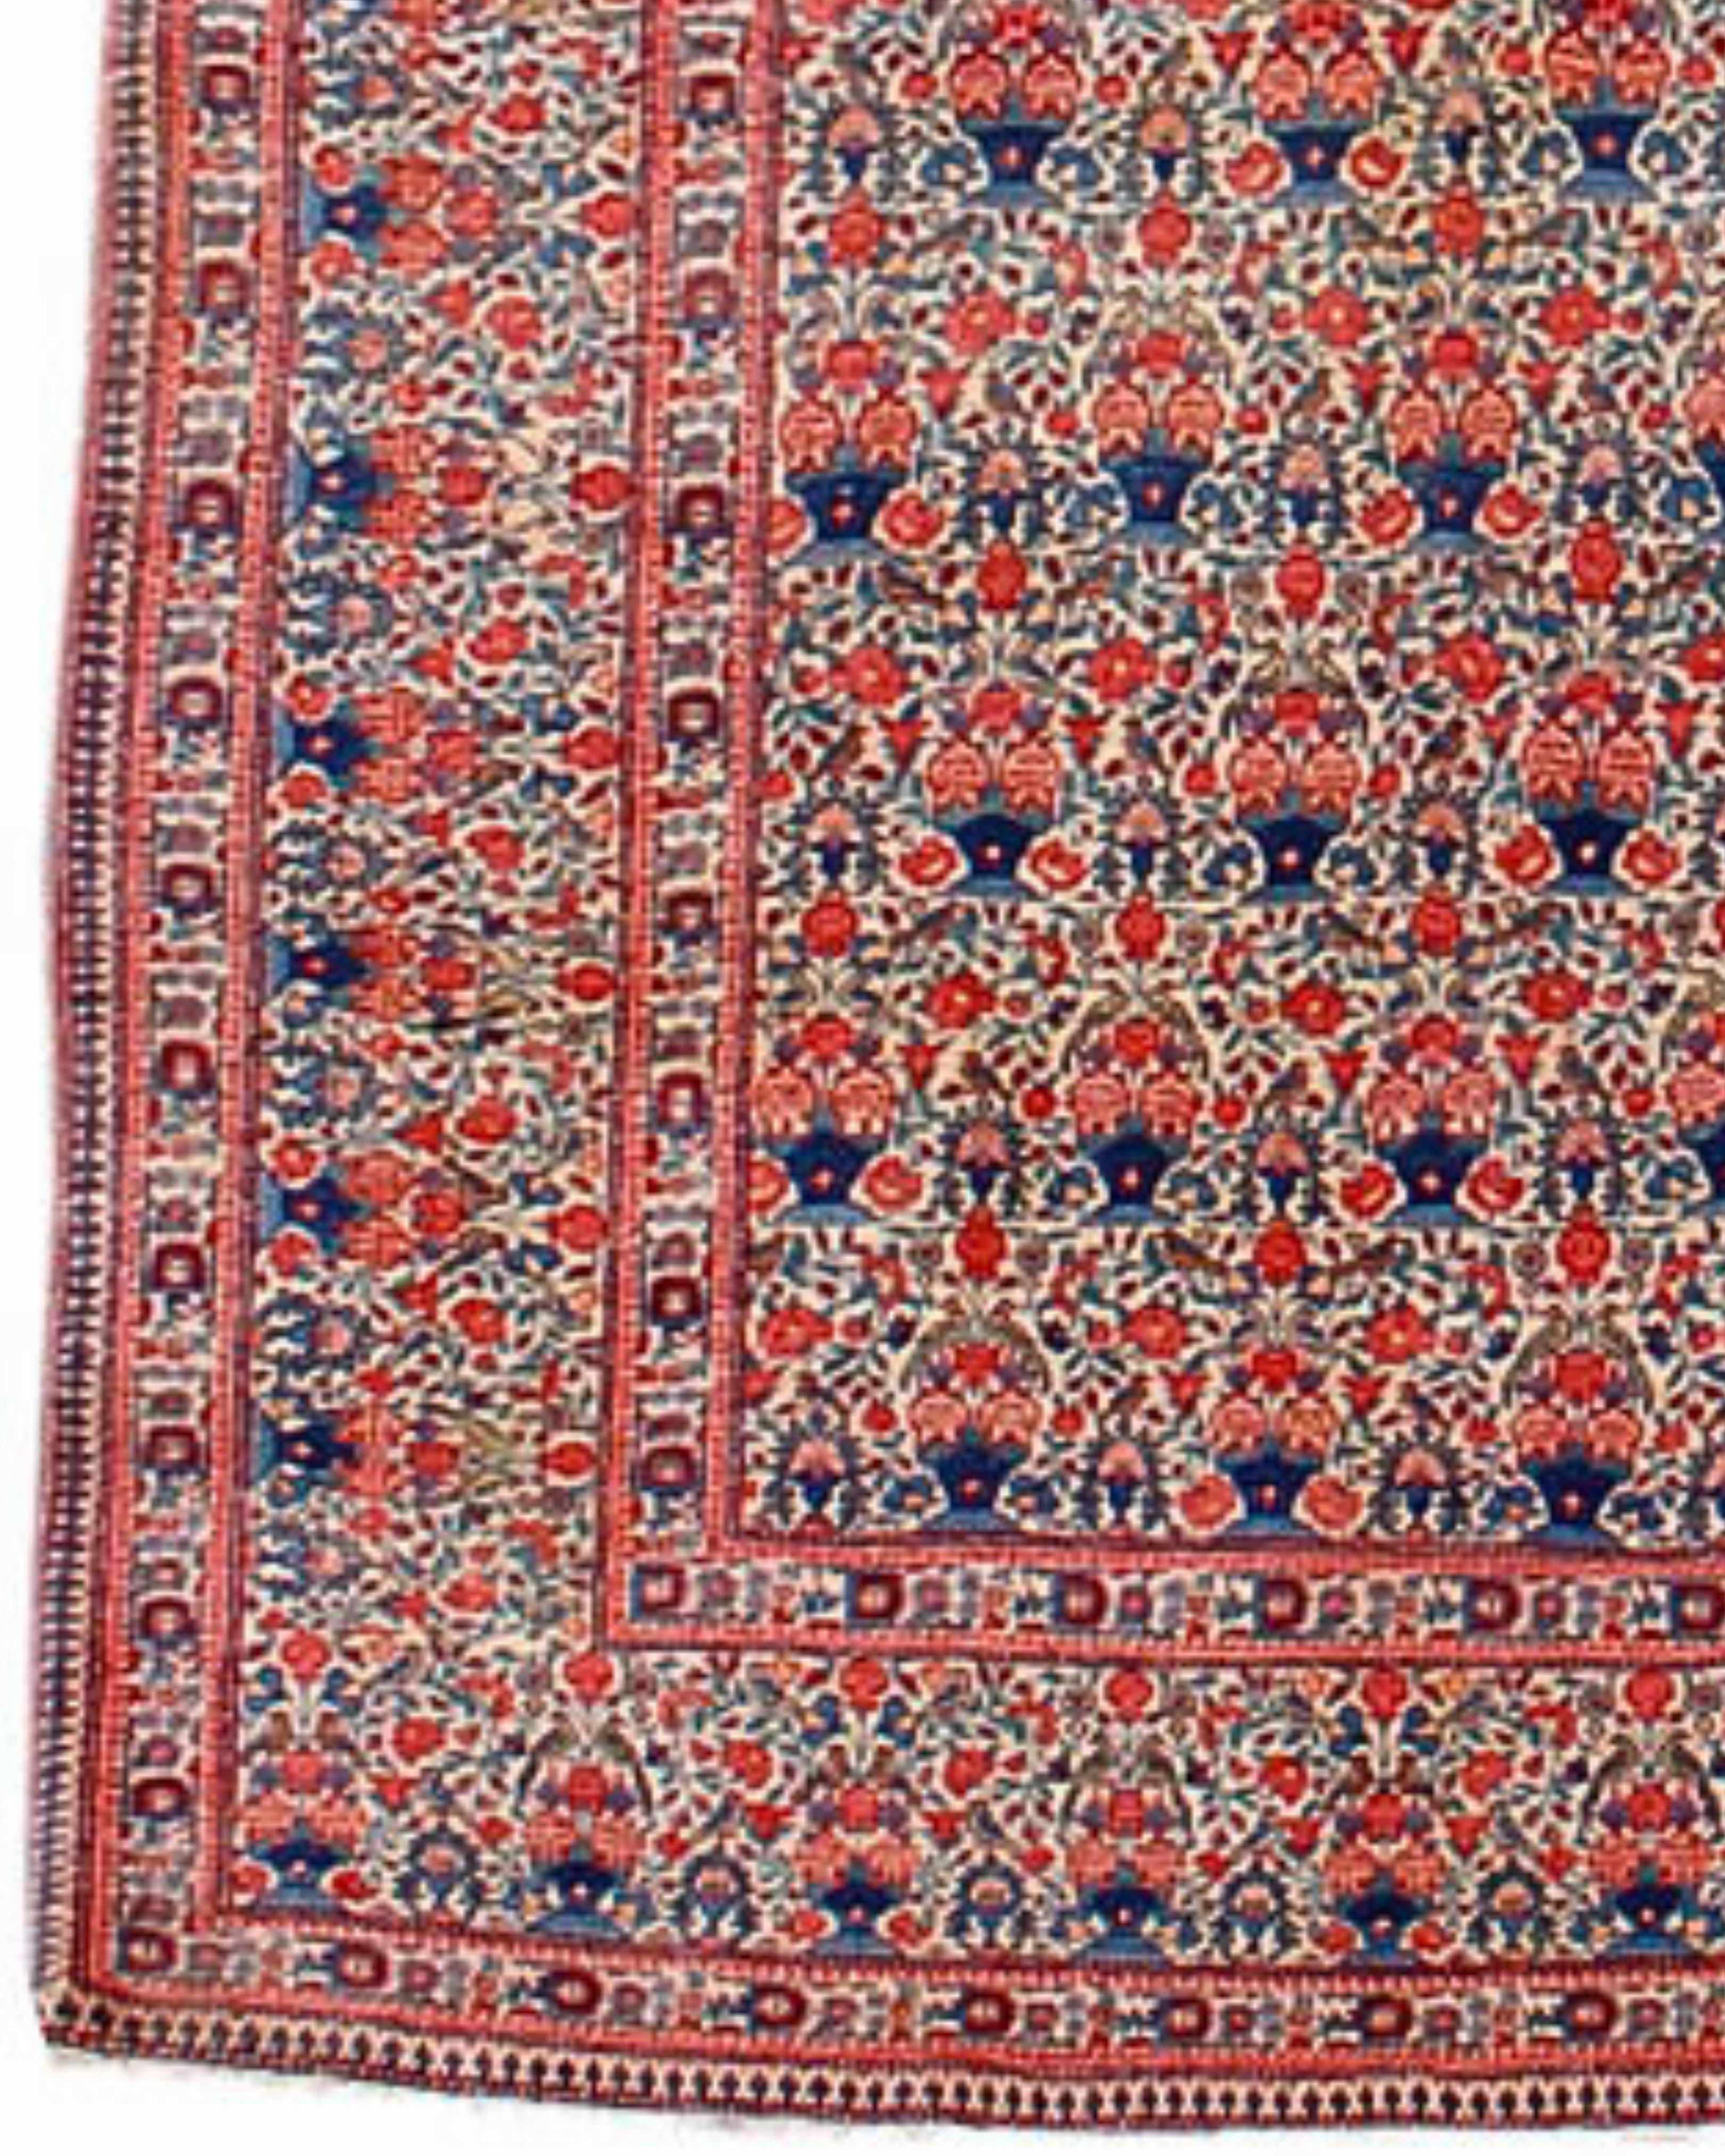 Hand-Woven Antique Persian Tehran Rug, Early 20th Century For Sale